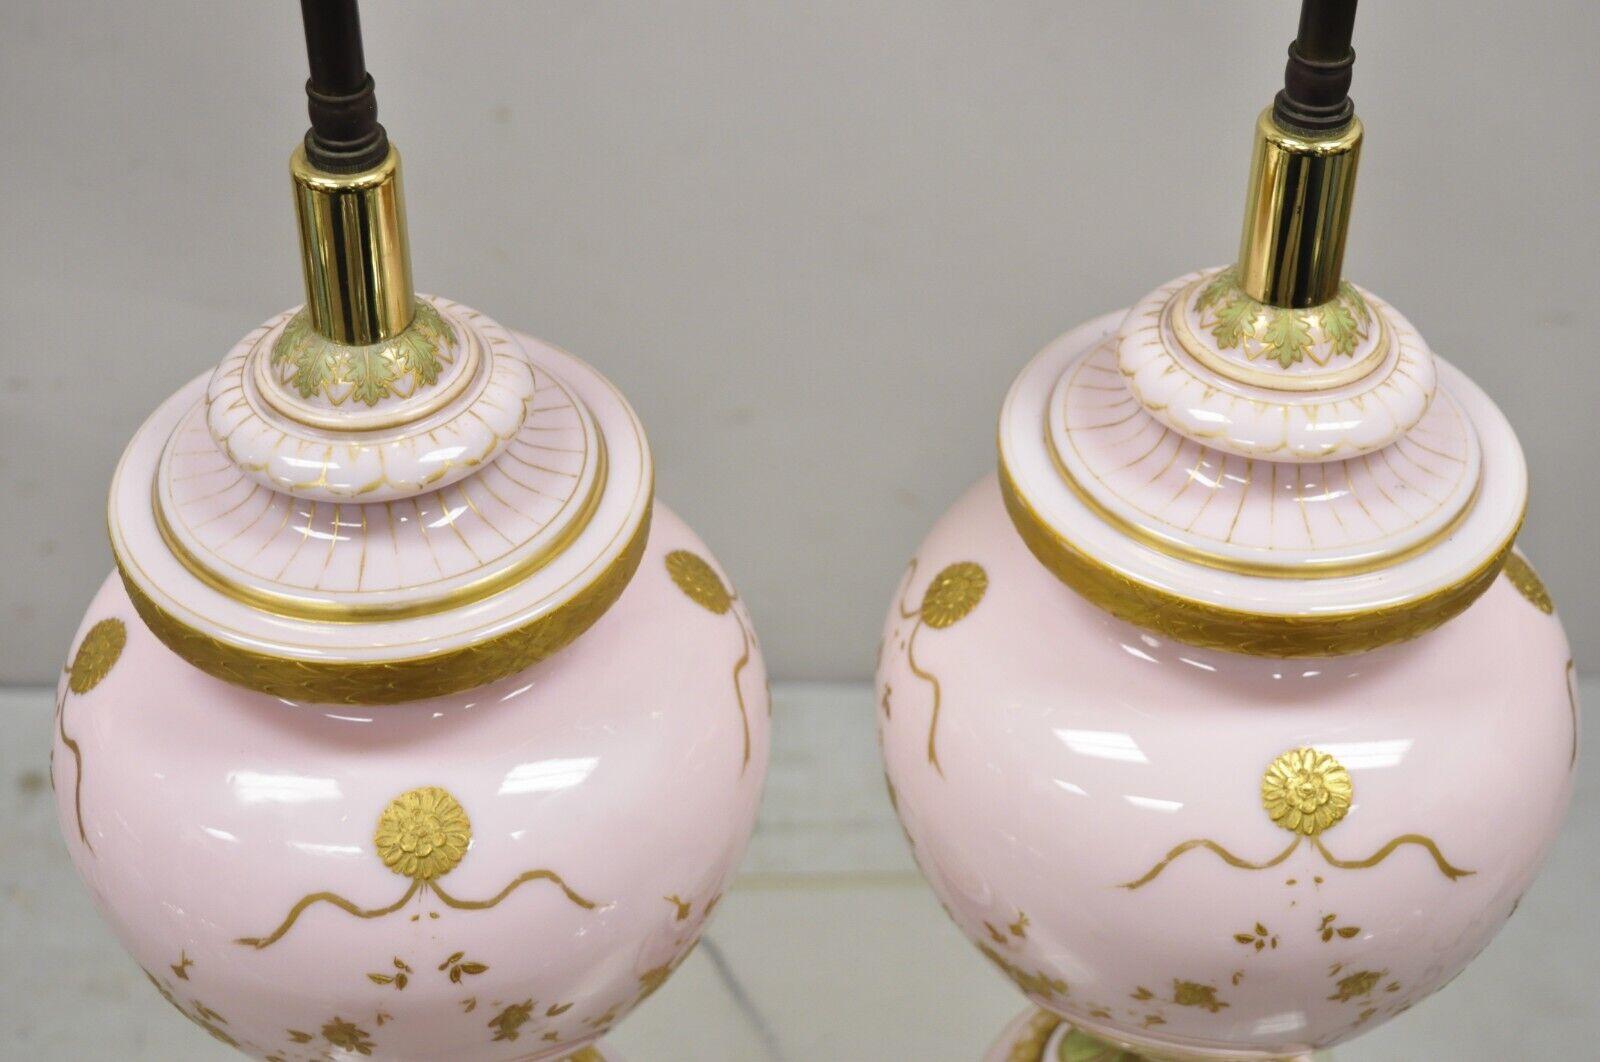 French Provincial Antique French Pink Porcelain Hand Painted Bulbous Table Lamps - a Pair For Sale